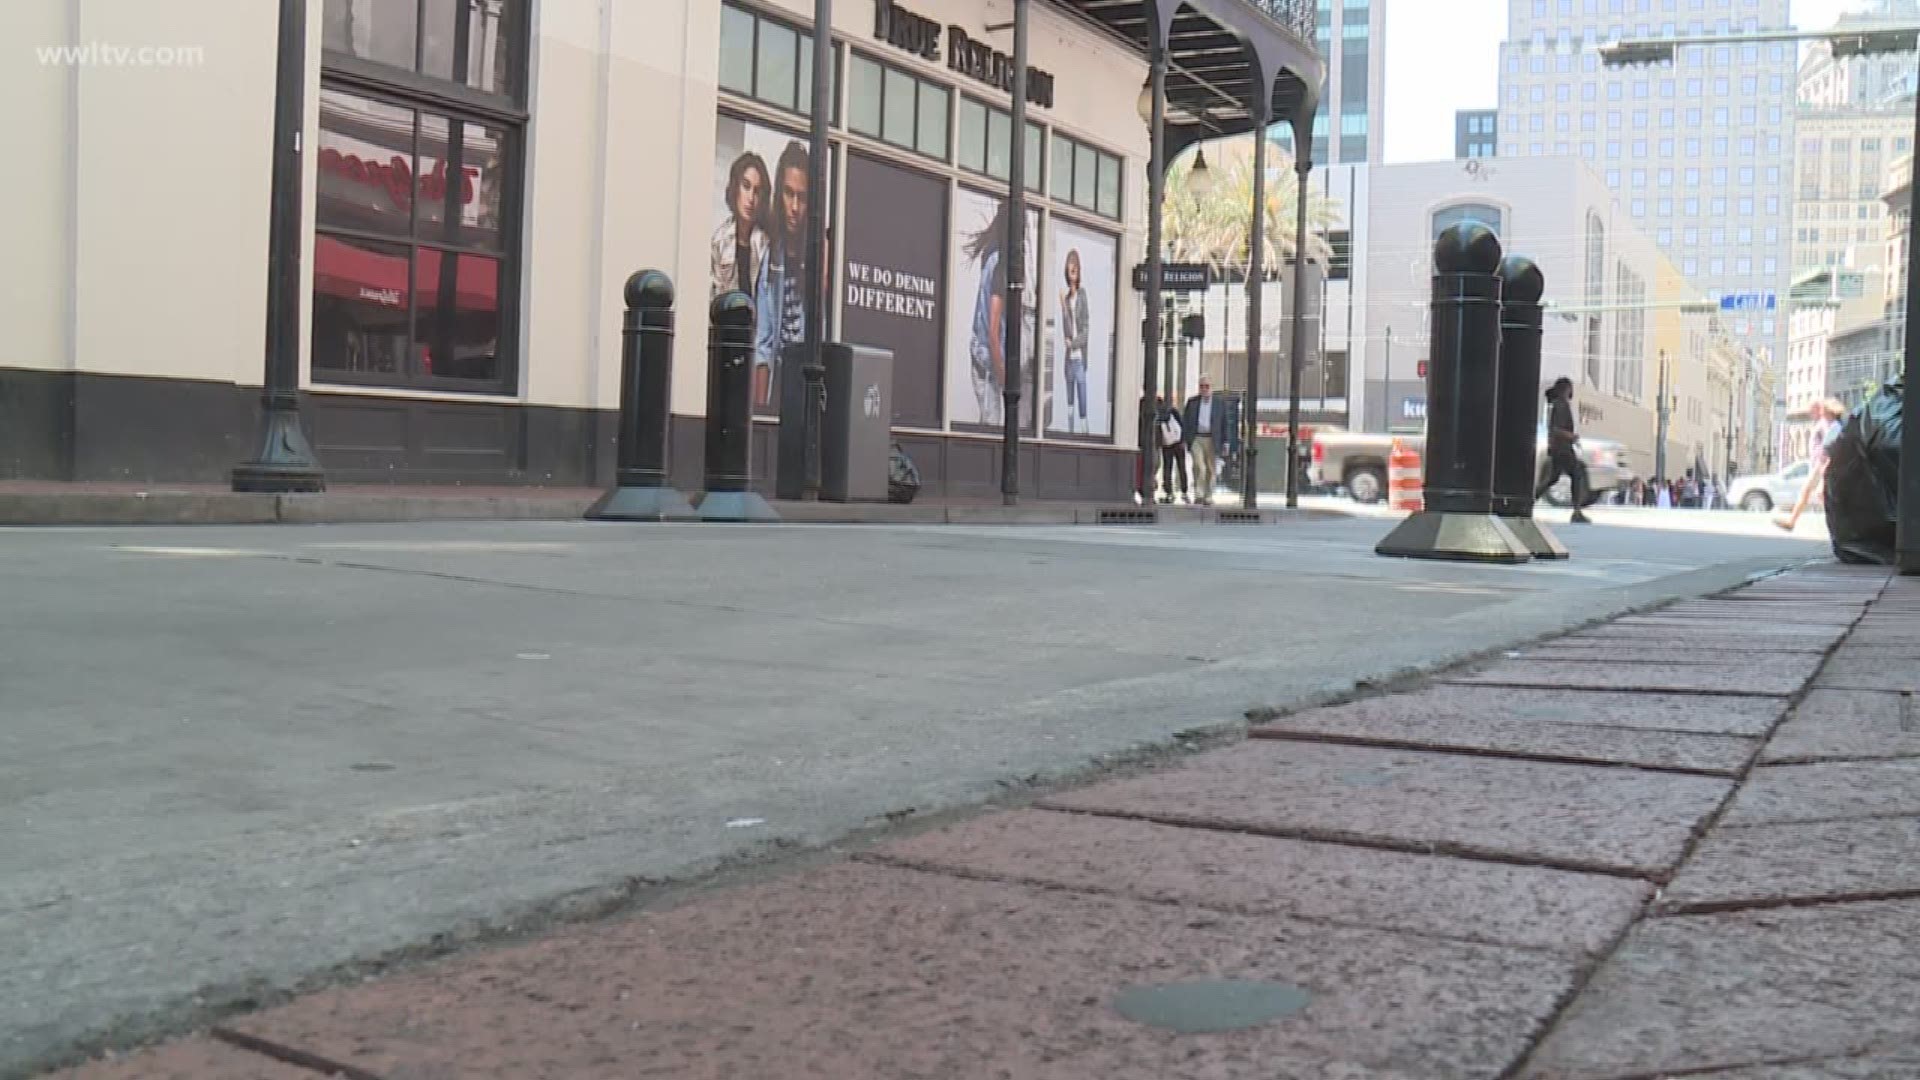 With car attacks becoming more common, tourists on Bourbon today said they're left with the realization that you always need to be on guard.